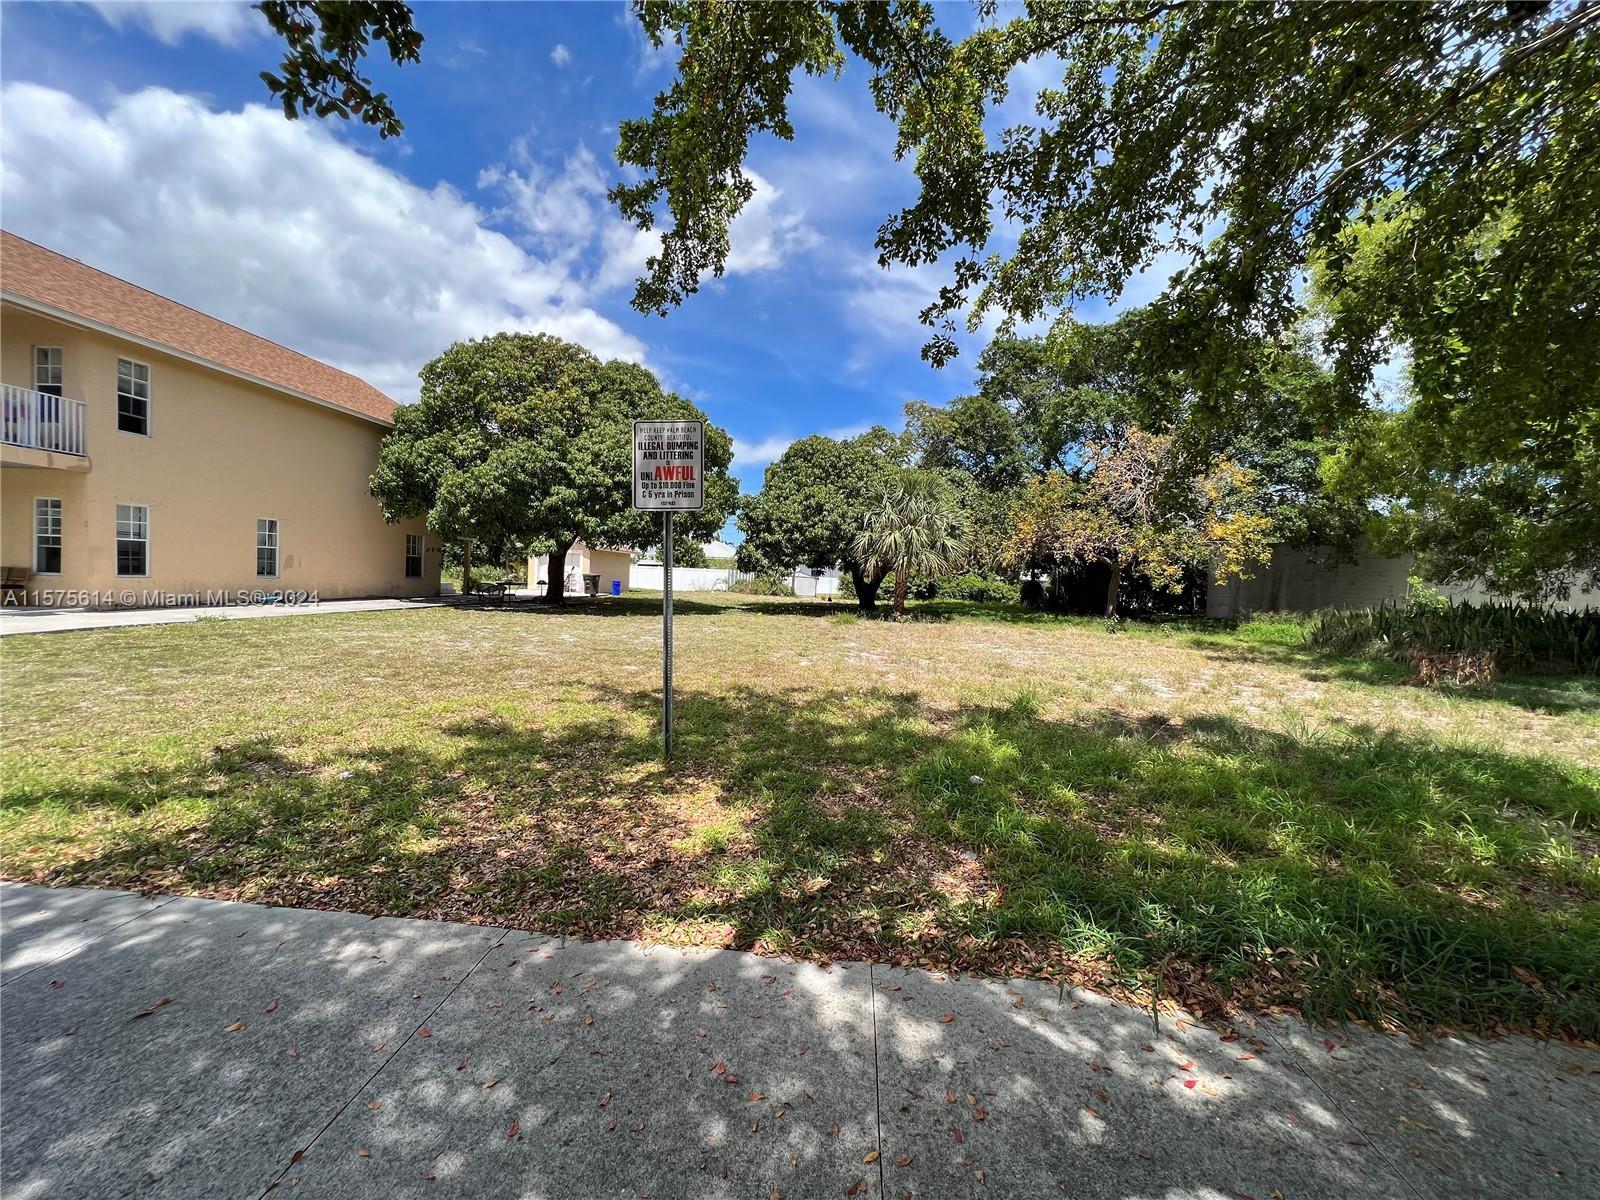 Photo of 533 17th St in West Palm Beach, FL